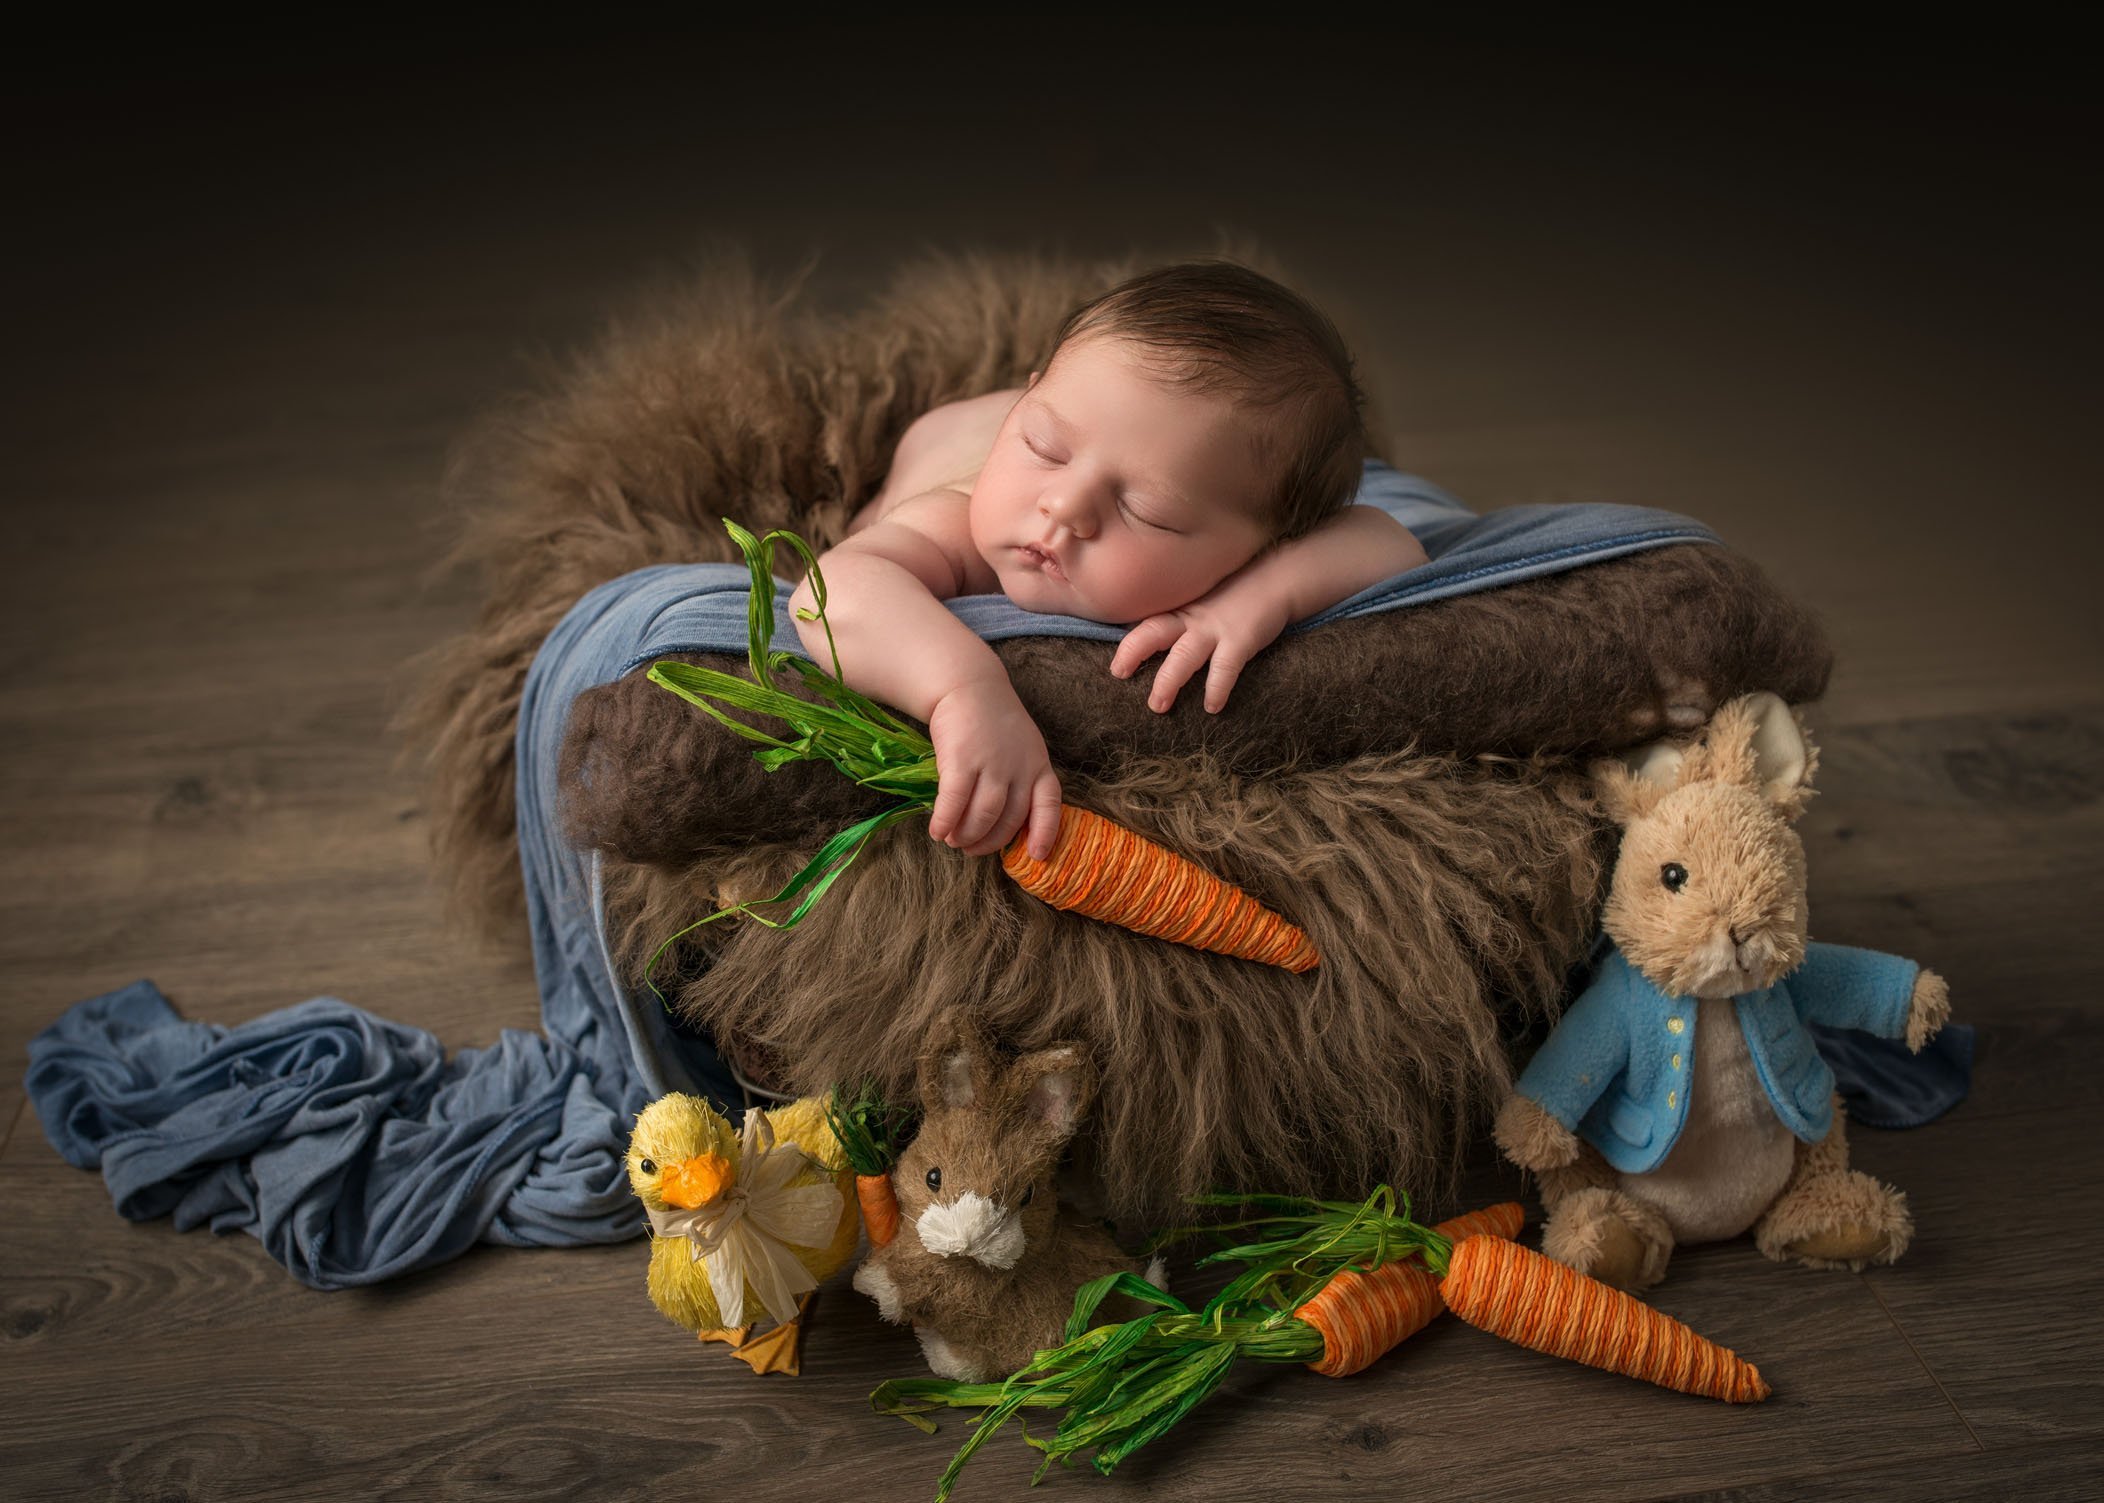 newborn baby holding a carrot while sleeping with Peter Rabbit and his friends keeping watch